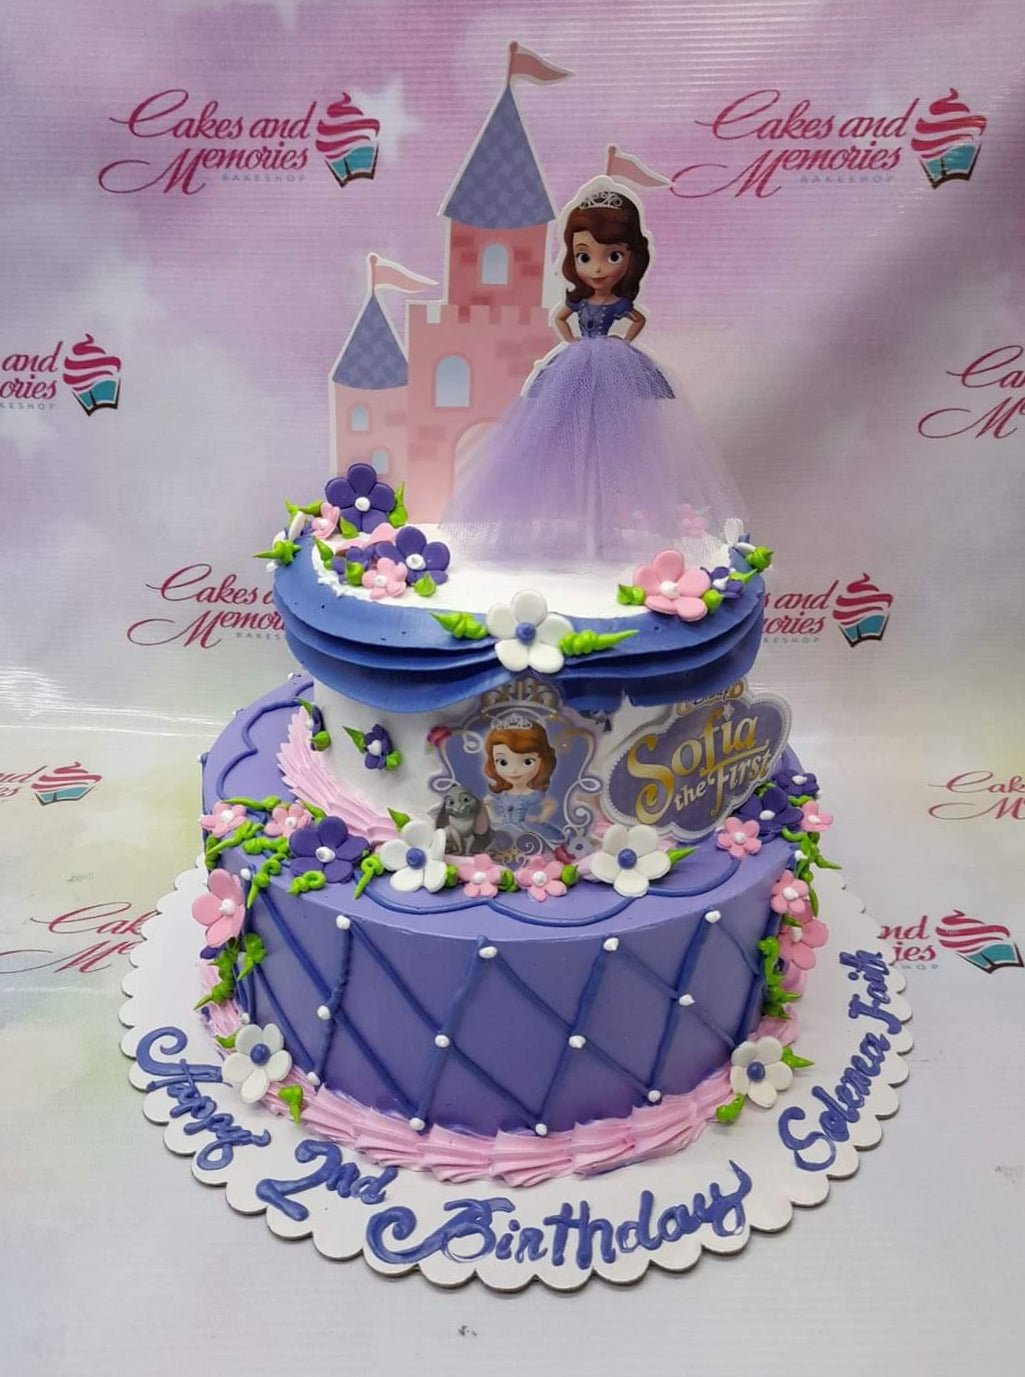 Sofia the first birthday cake - Sue Cakes and Events